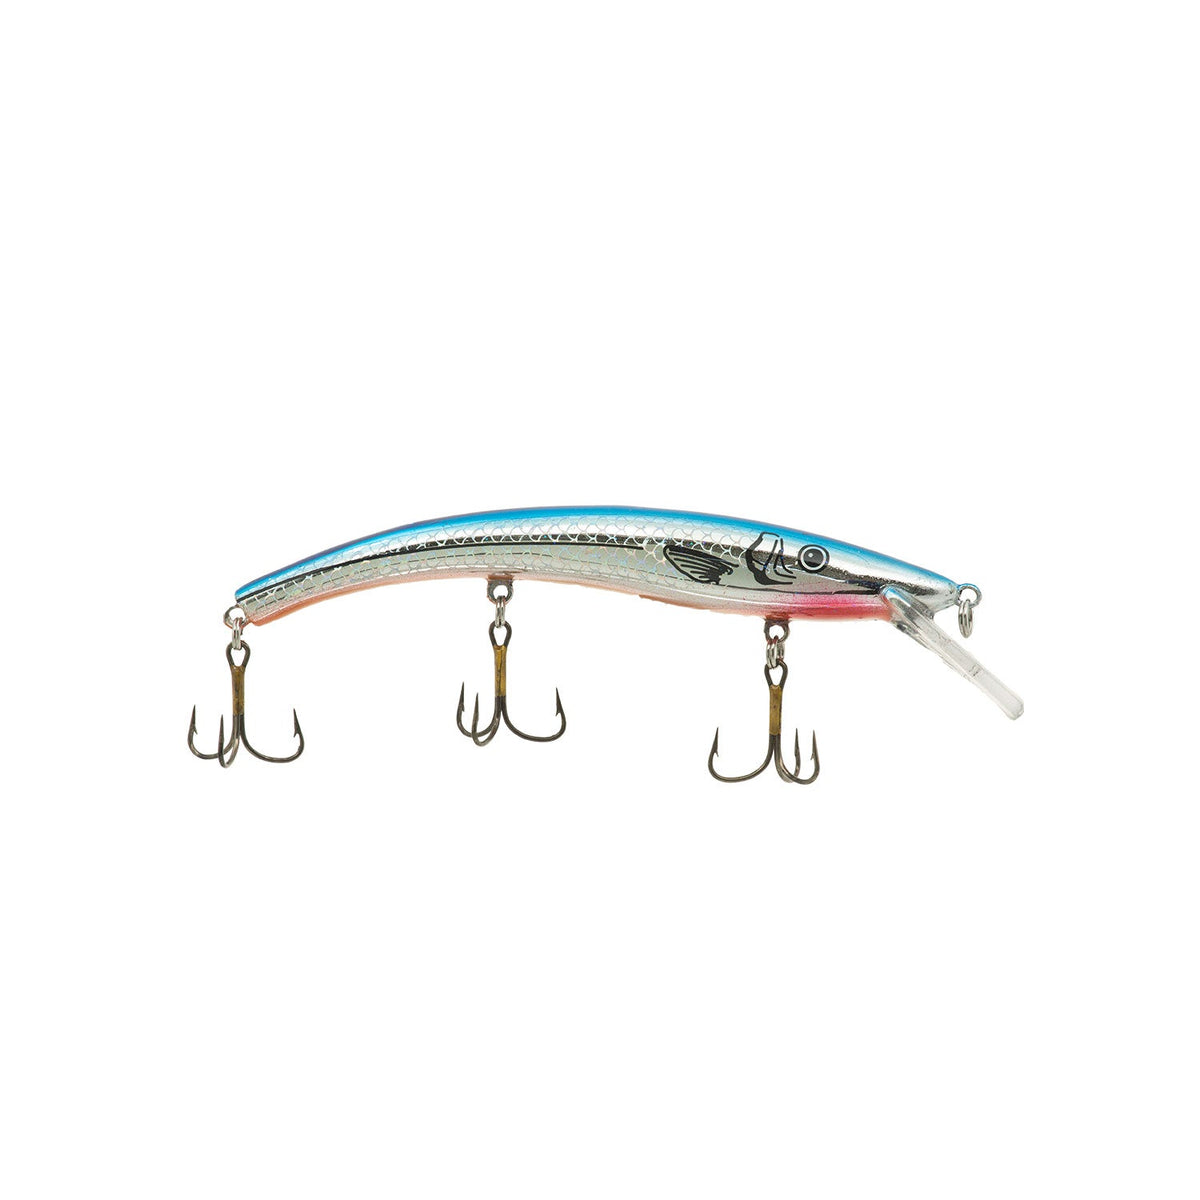 Reef Runner - 700 Series - Ripstick - Clearance Sale - Acme Tackle